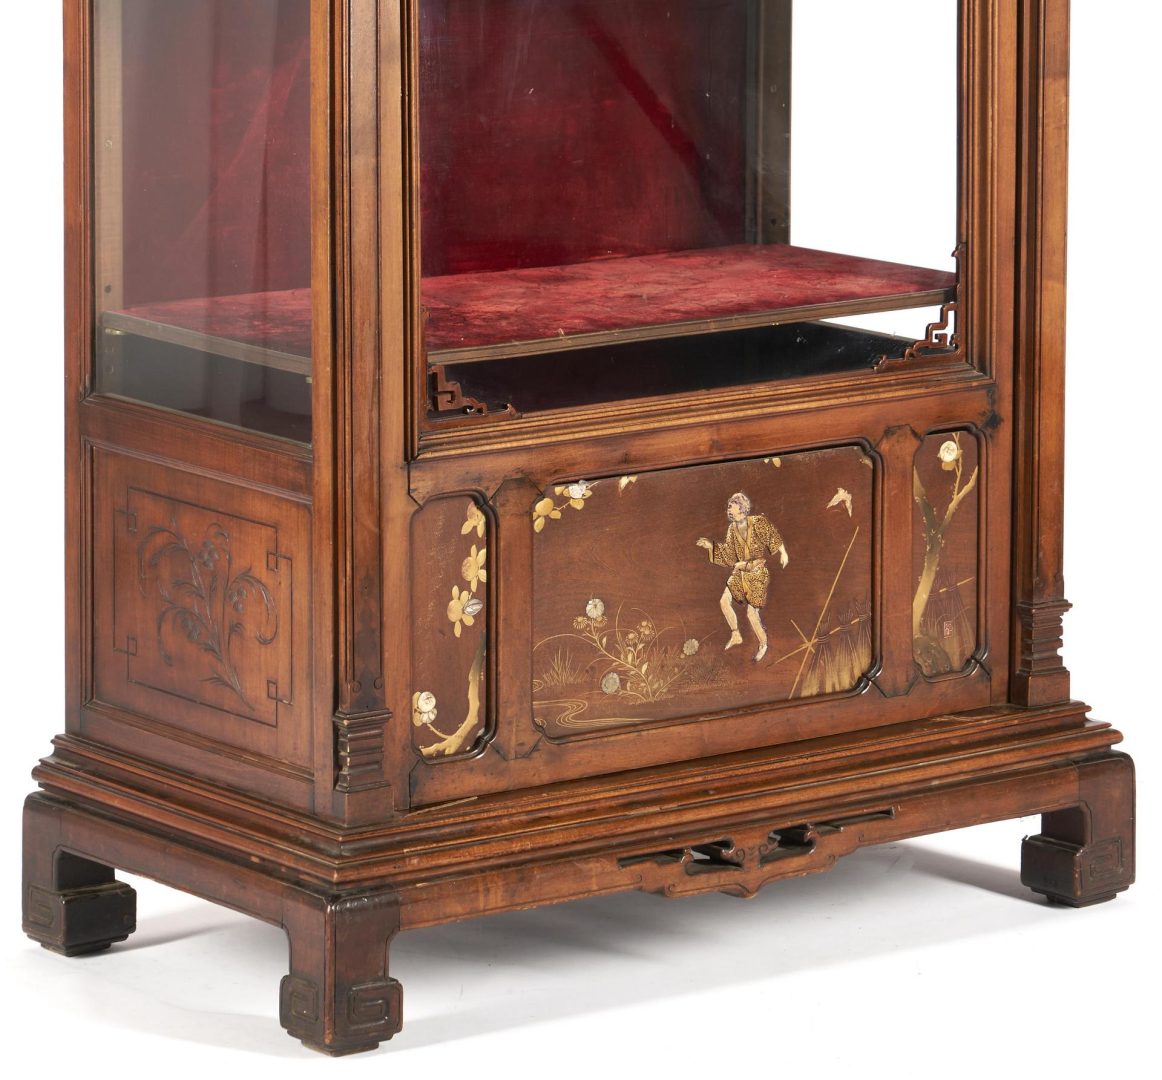 Lot 172: Chinoiserie Inlaid Lacquer Display Cabinet and Altar